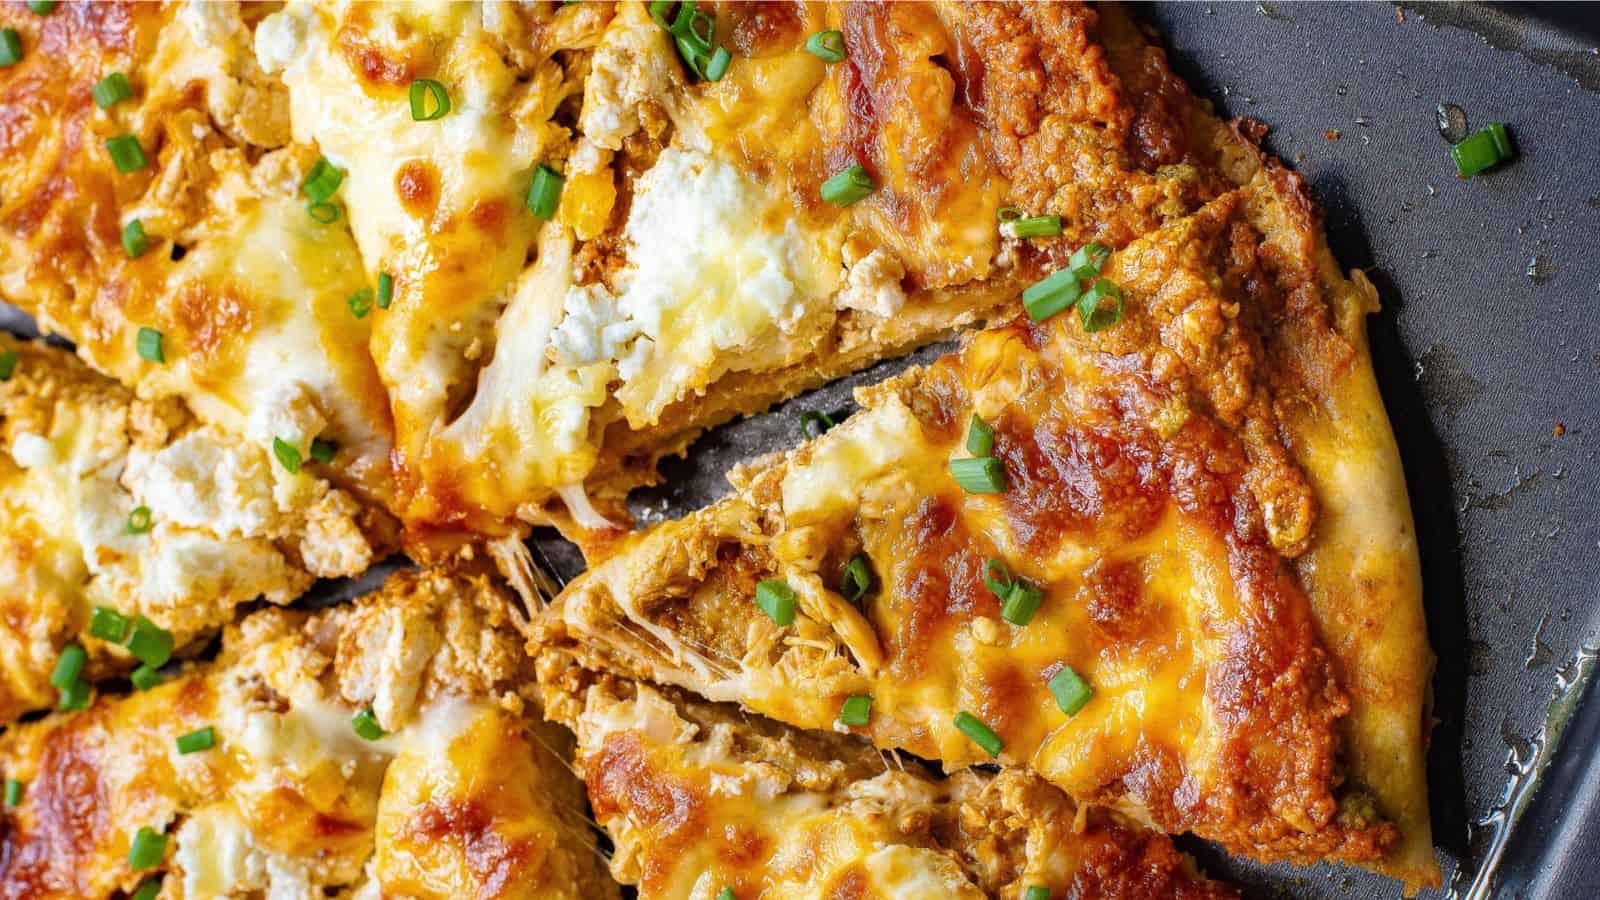 25 New Ways to Cook Chicken That Your Family Will Truly Love